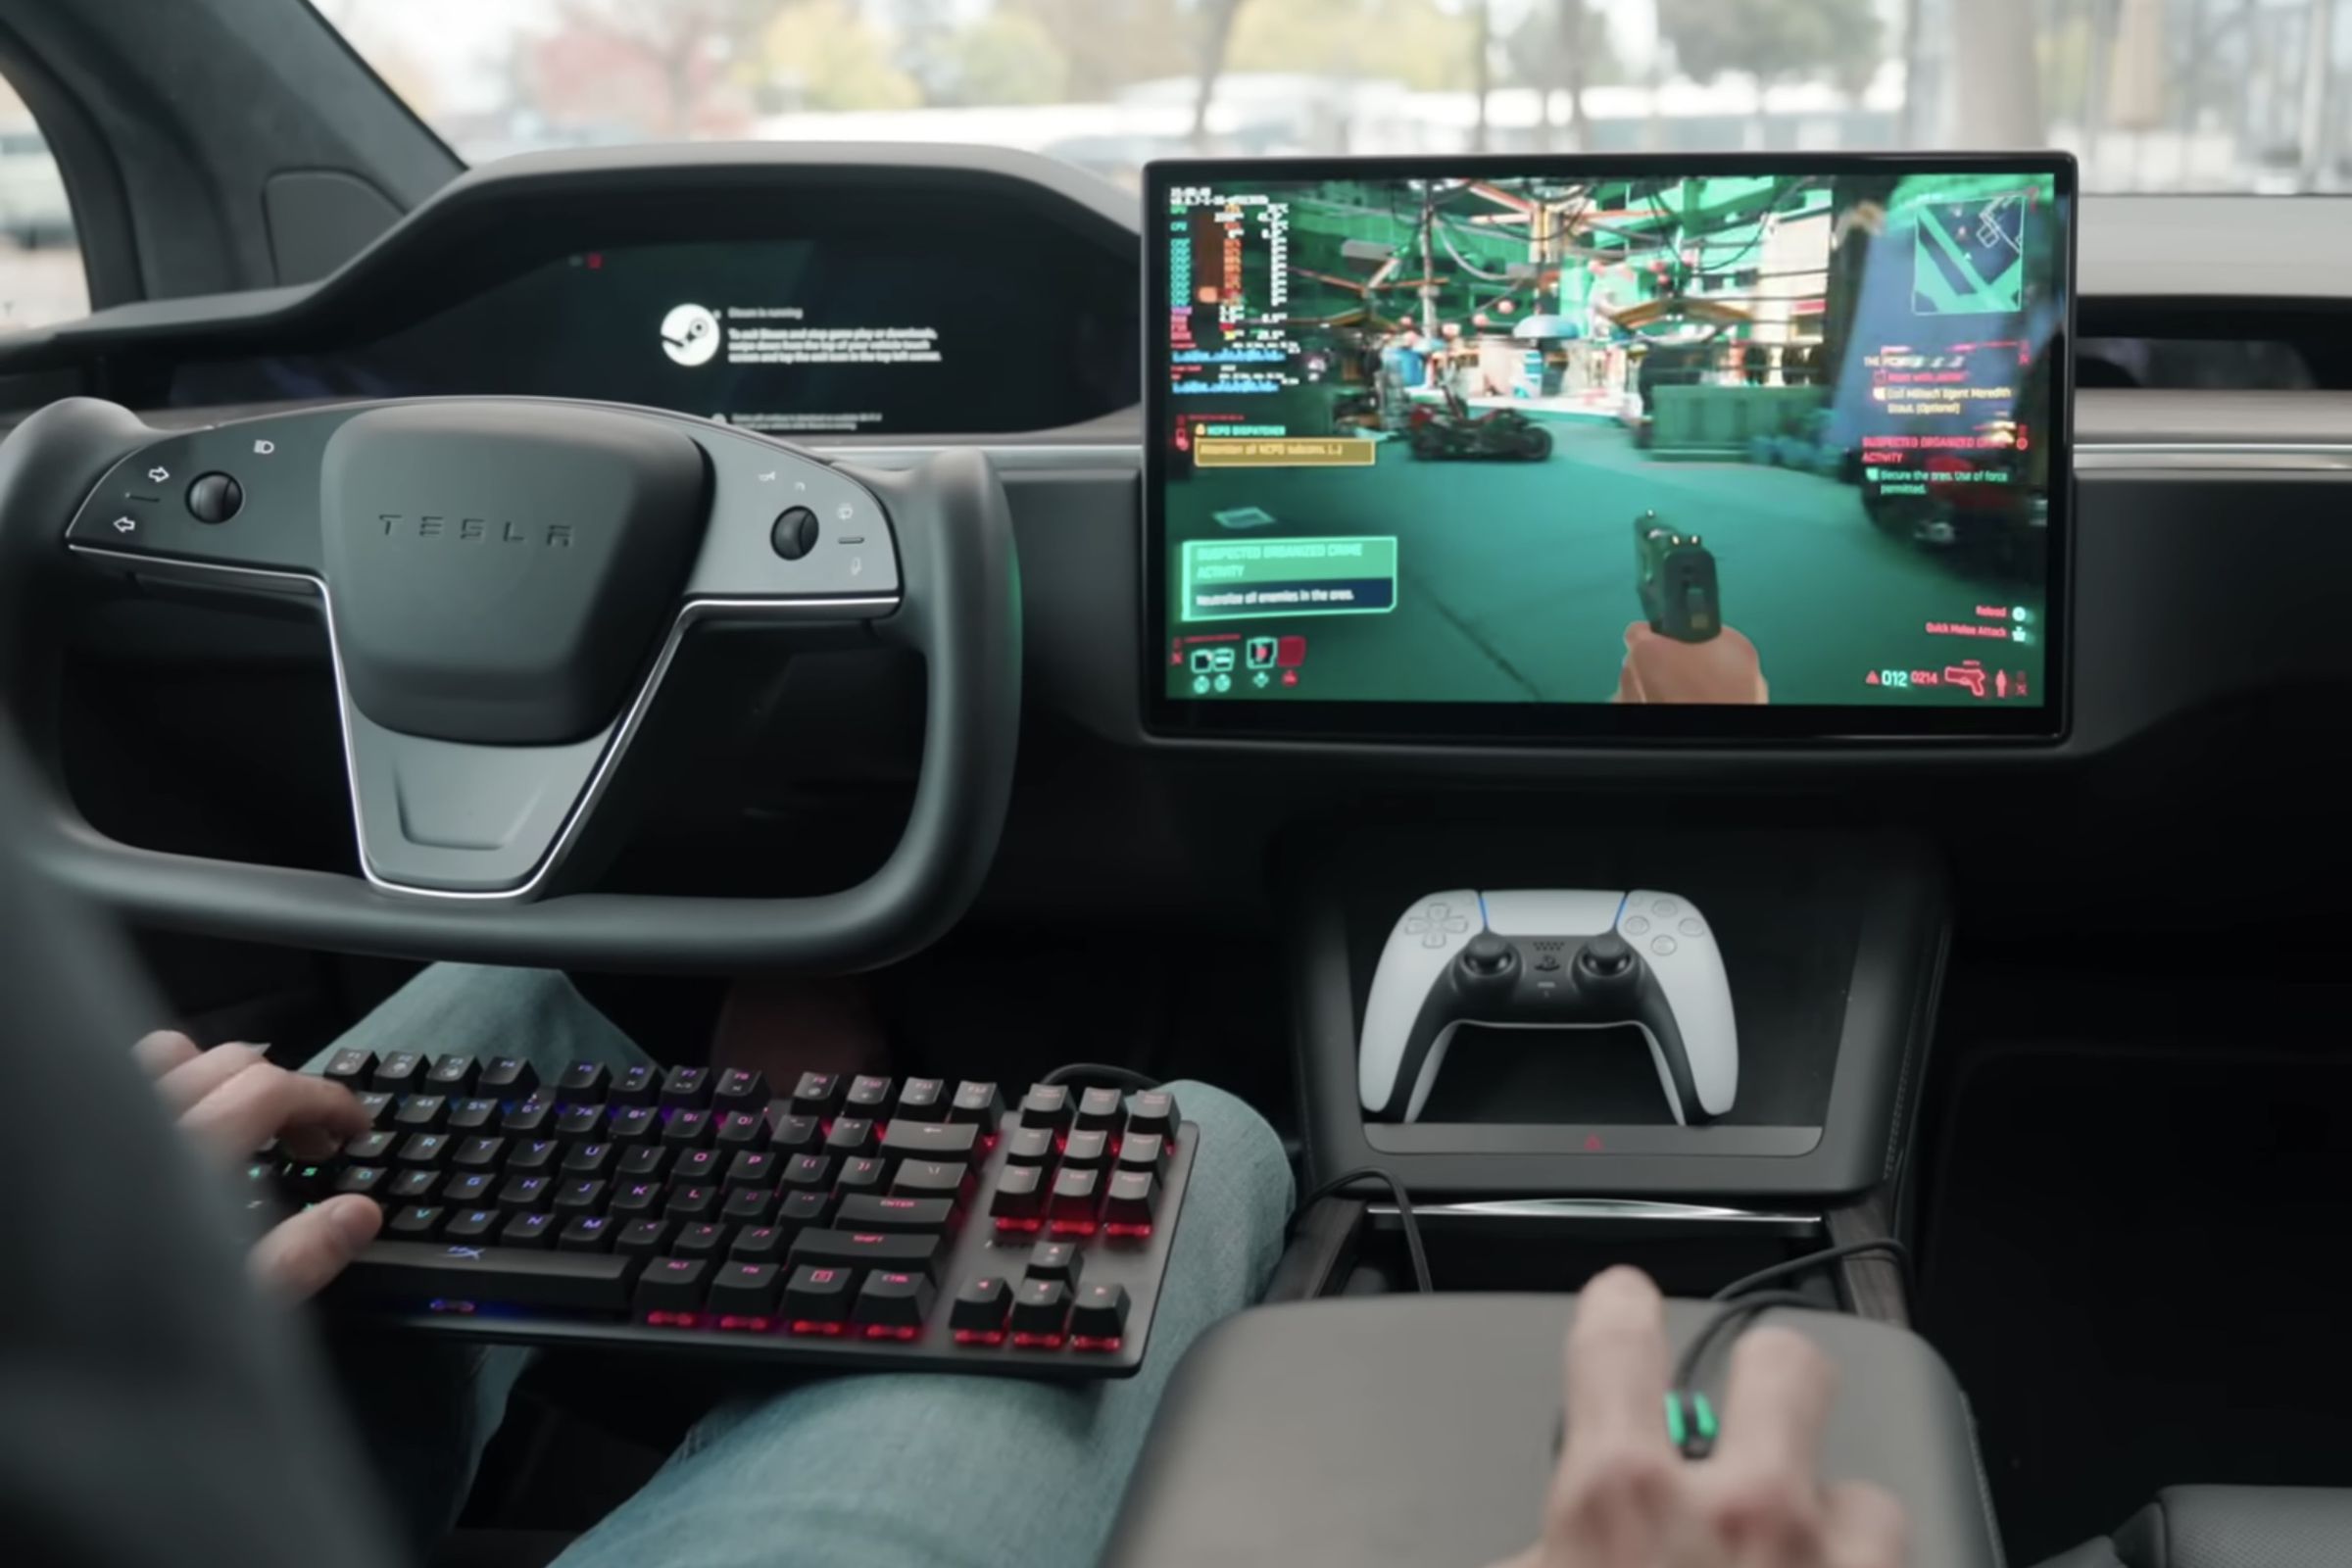 INT: driver of a Tesla model S with yoke steering wheel is parked and playing Cyberpunk 2077 steam game on the car’s infotainment screen while using a gaming keyboard in his lap, a mouse on the arm rest, and a PS5 controller sitting in the center console.